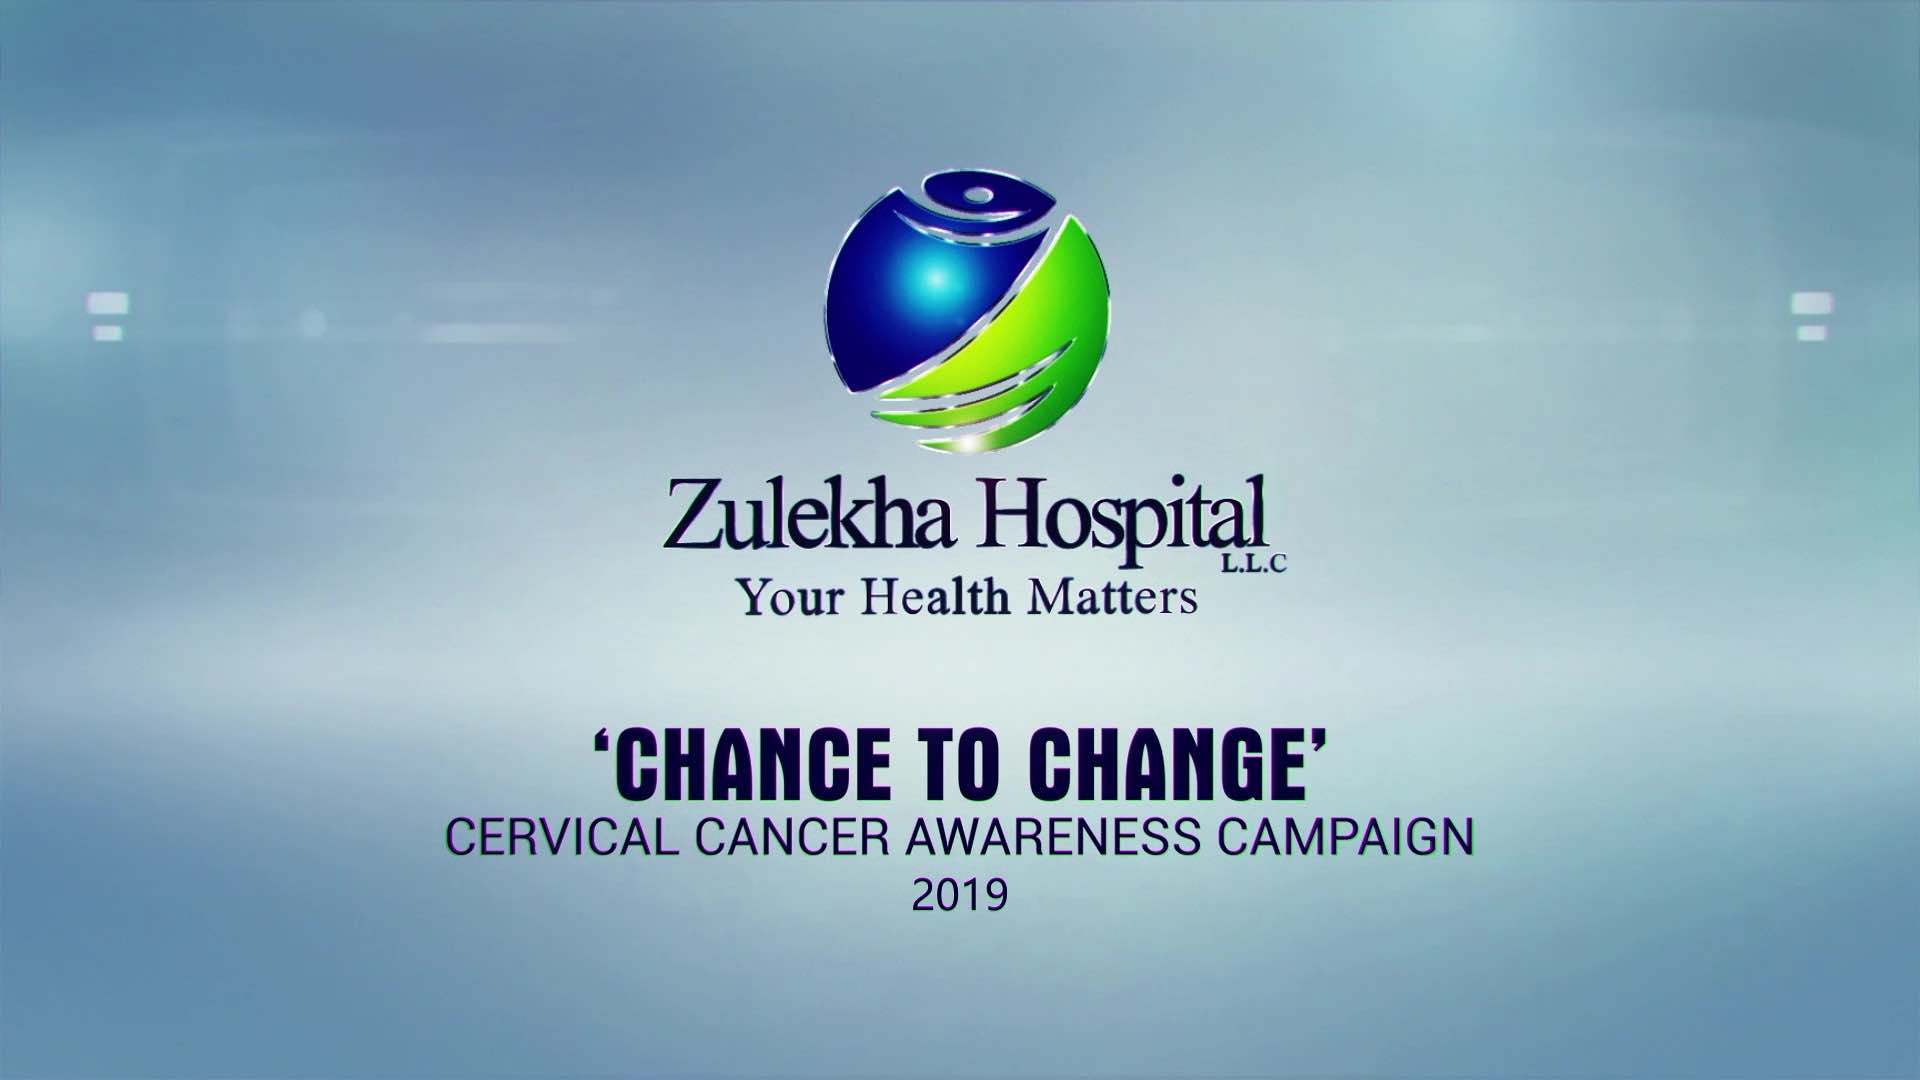 Chance To Change_Cervical Cancer Awareness Campaign 2019_Zulekha Hospital